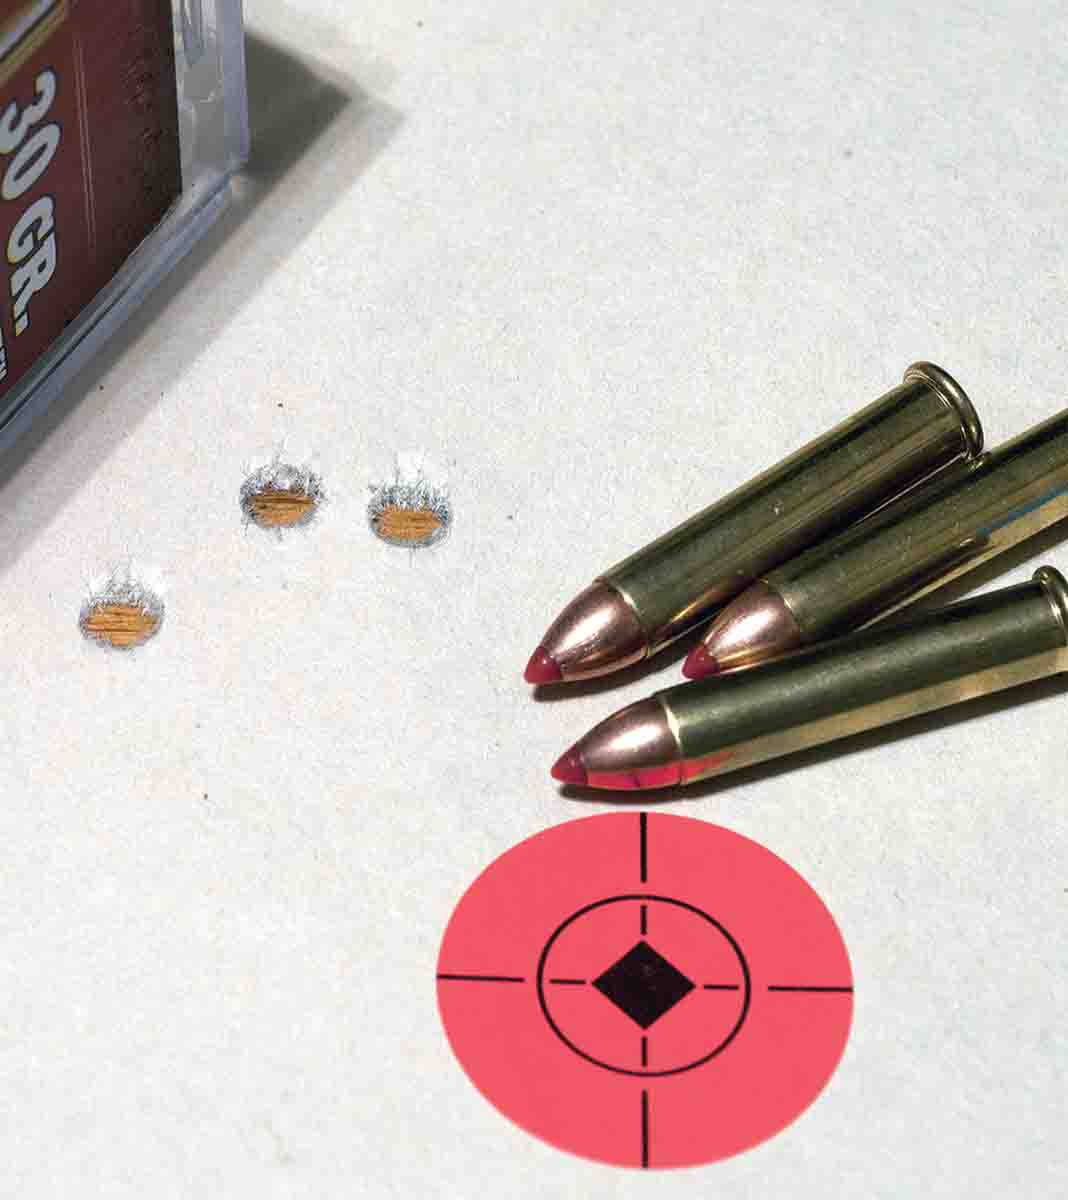 This three-shot group with Hornady 22 Mag ammunition with 30-grain V-MAX bullets shows plenty of “jackrabbit” accuracy.